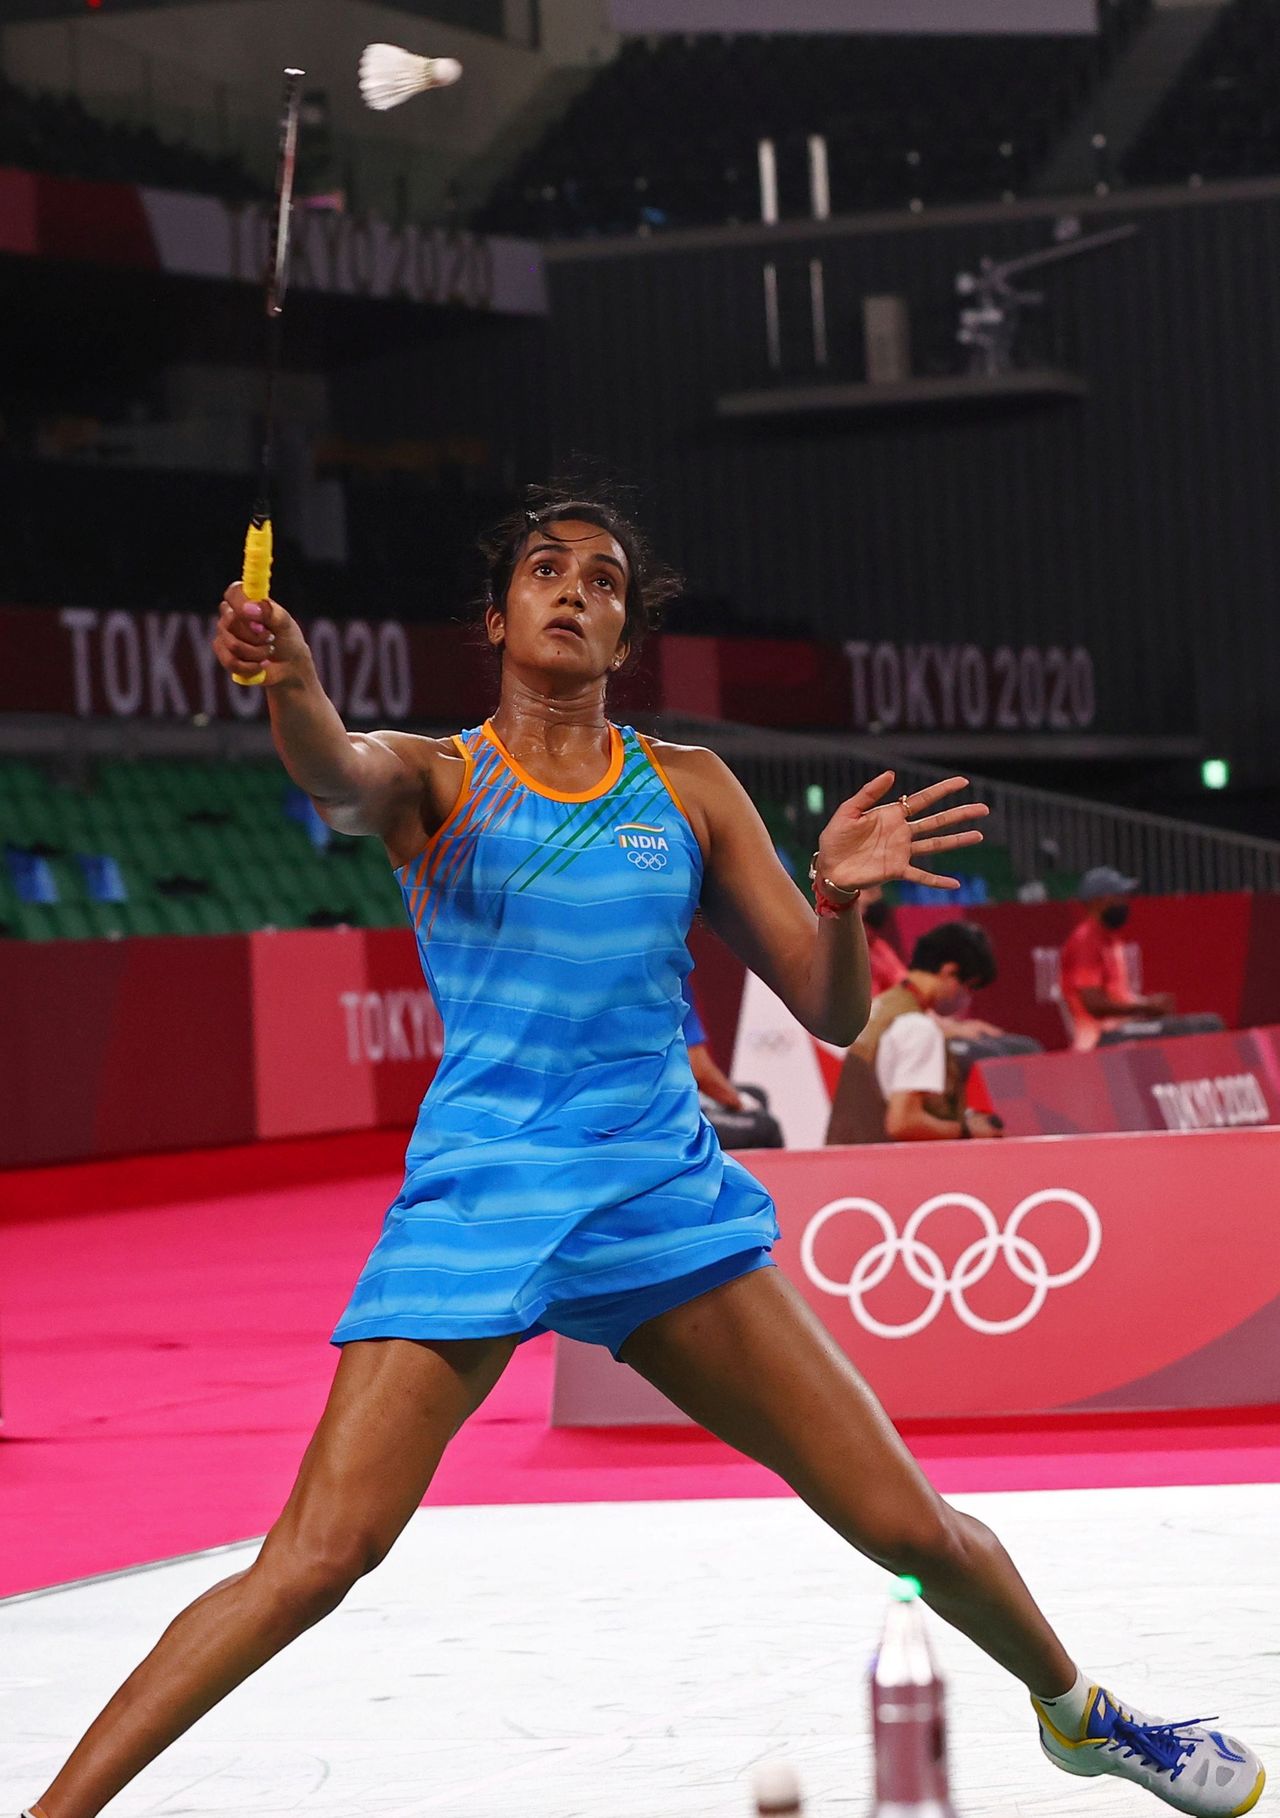 Tokyo 2020 Olympics - Badminton - Women's Singles - Group Stage - MFS - Musashino Forest Sport Plaza, Tokyo, Japan – July 28, 2021. P.V. Sindhu of India in action during the match against Cheung Ngan Yi of Hong Kong. REUTERS/Leonhard Foeger